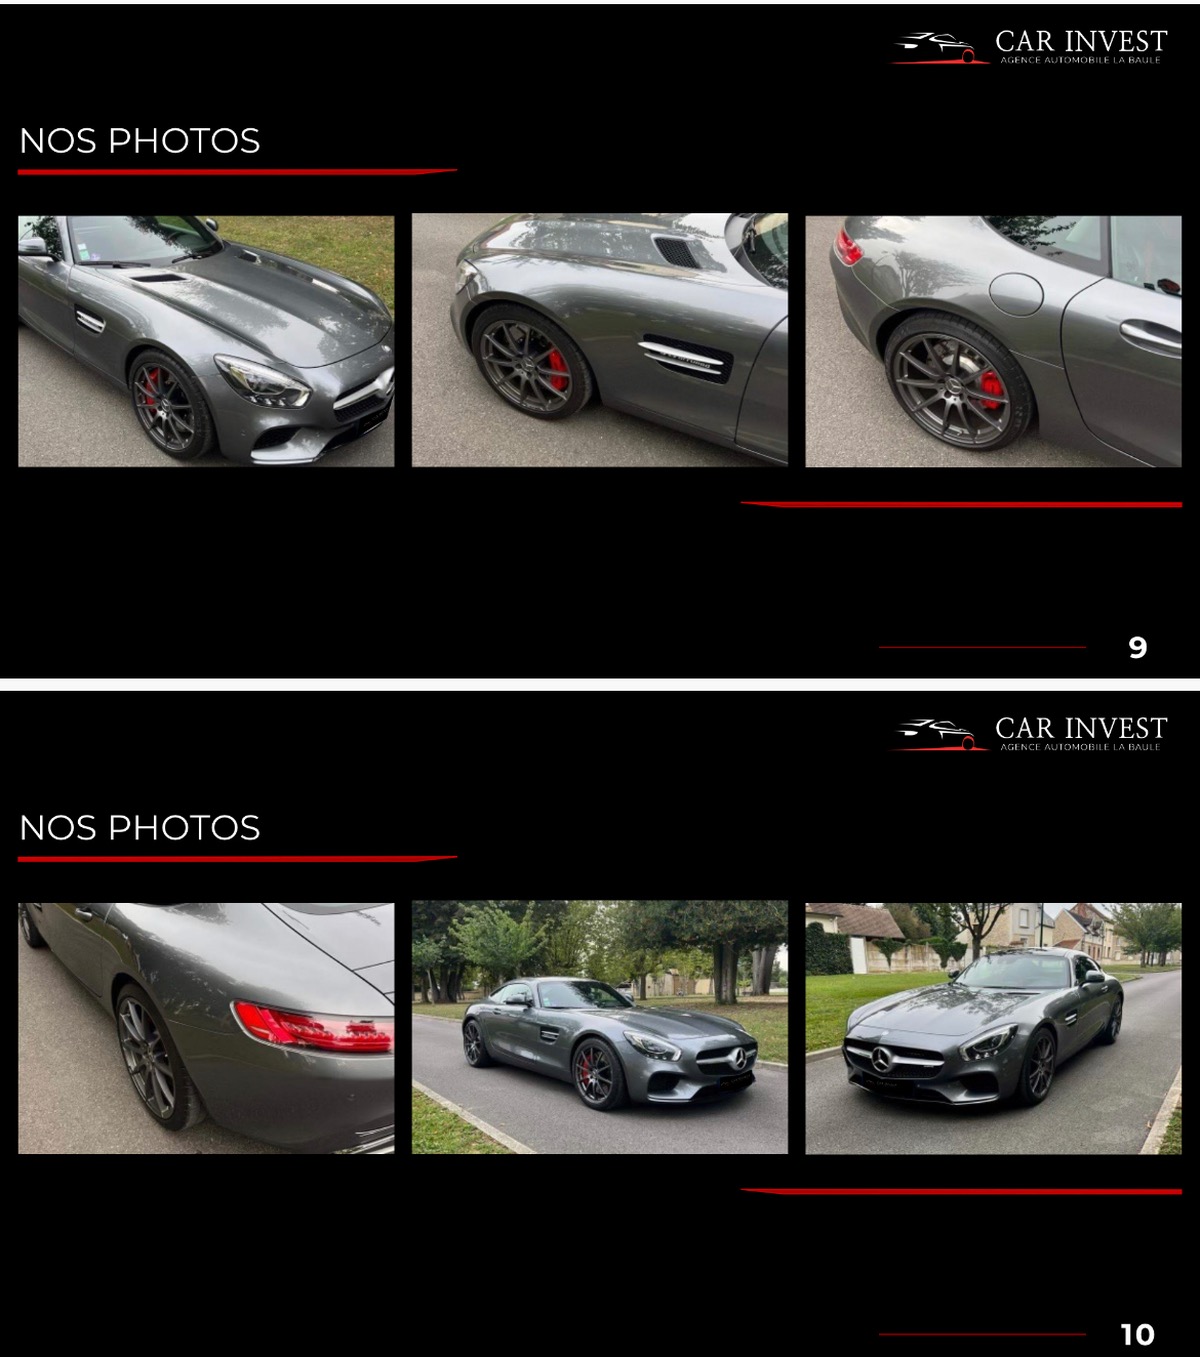 Mercedes AMG GT S FULL OPTION 510 CH CONFIGURATION RARE